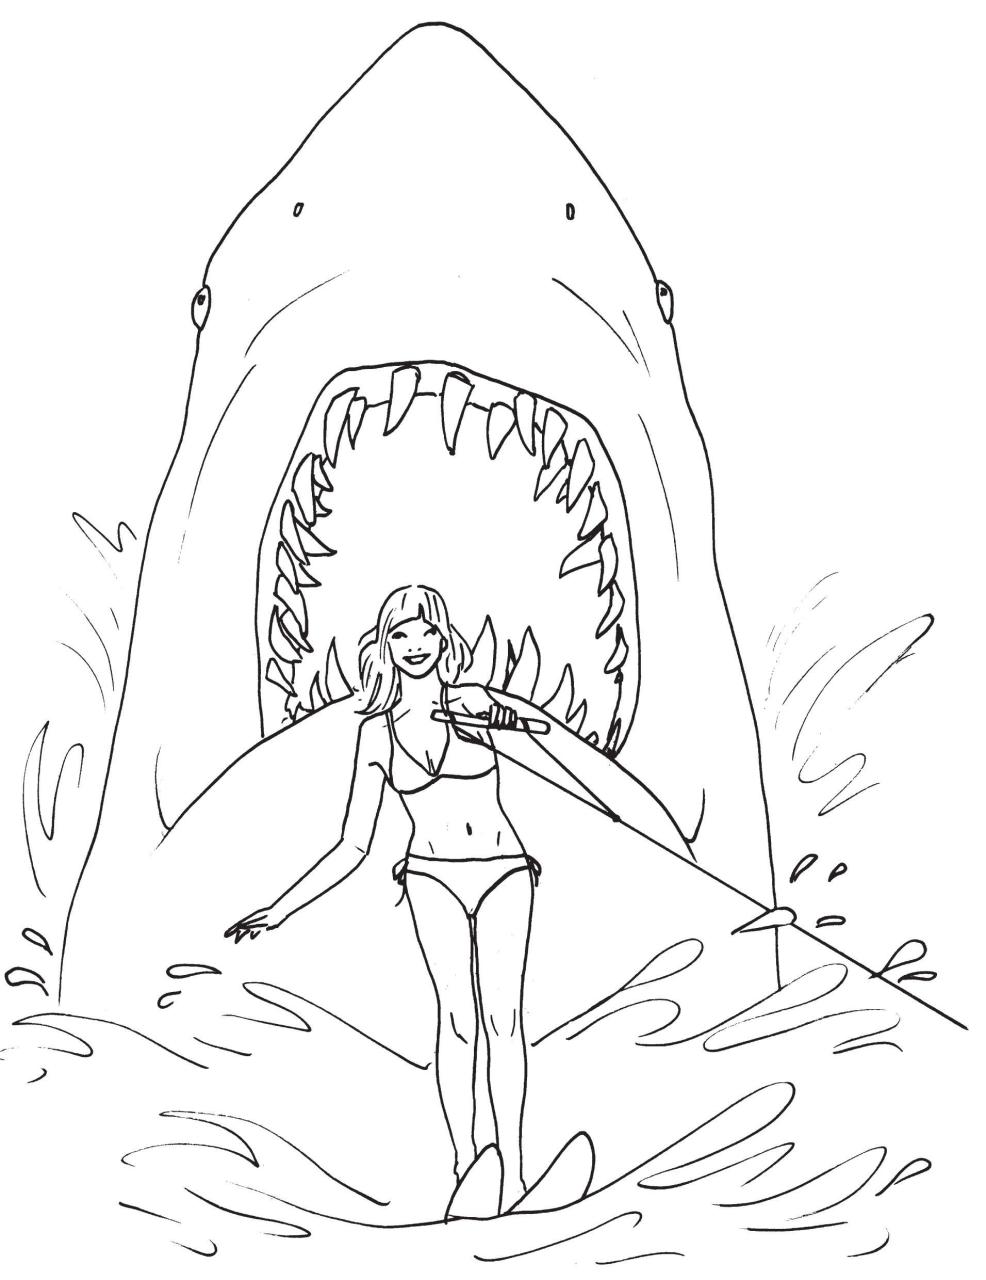 Great White Shark Coloring Pages to Print Free Coloring Sheets